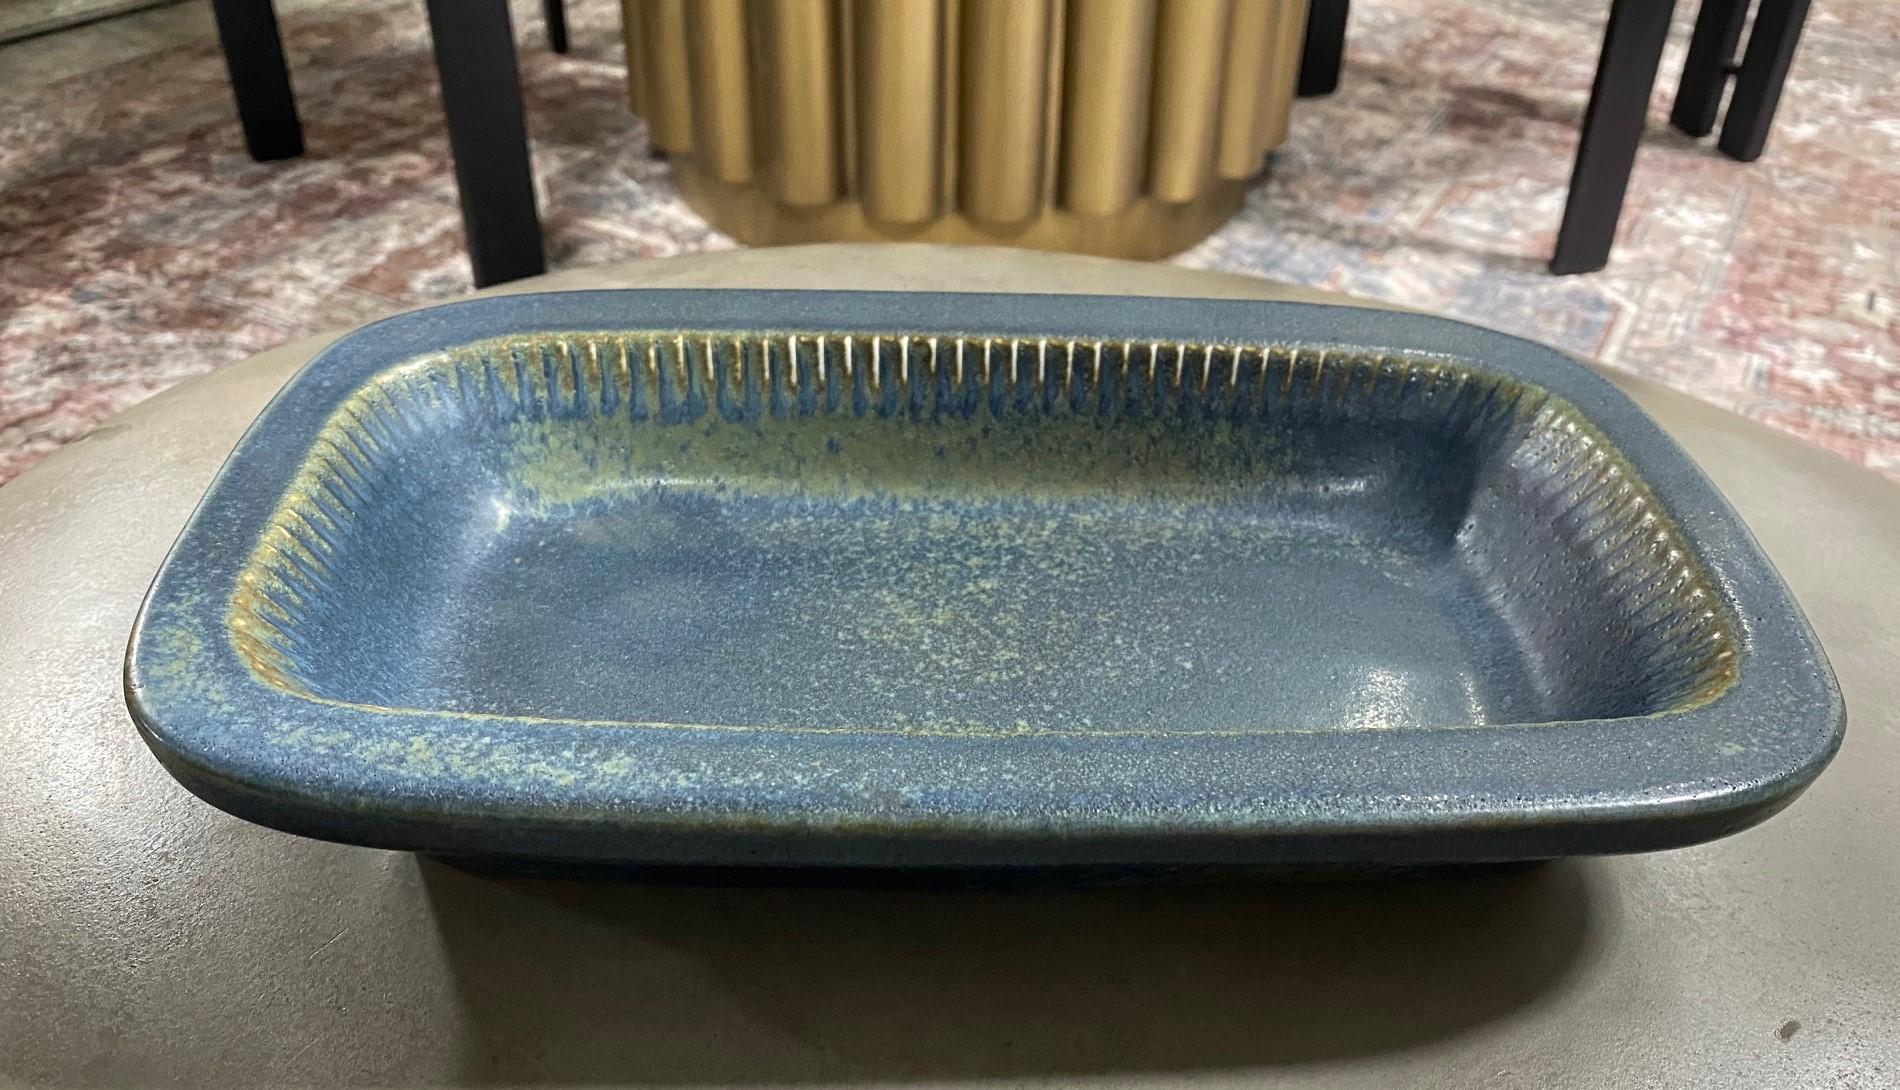 A beautifully designed, richly, and deeply blue-colored / glazed ceramic large bowl / tray by famed Swedish designer Carl-Harry Stålhane for Rörstrand, Sweden. The craftsmanship and color are stunning. A quite hefty and sizeable work.

Carl-Harry